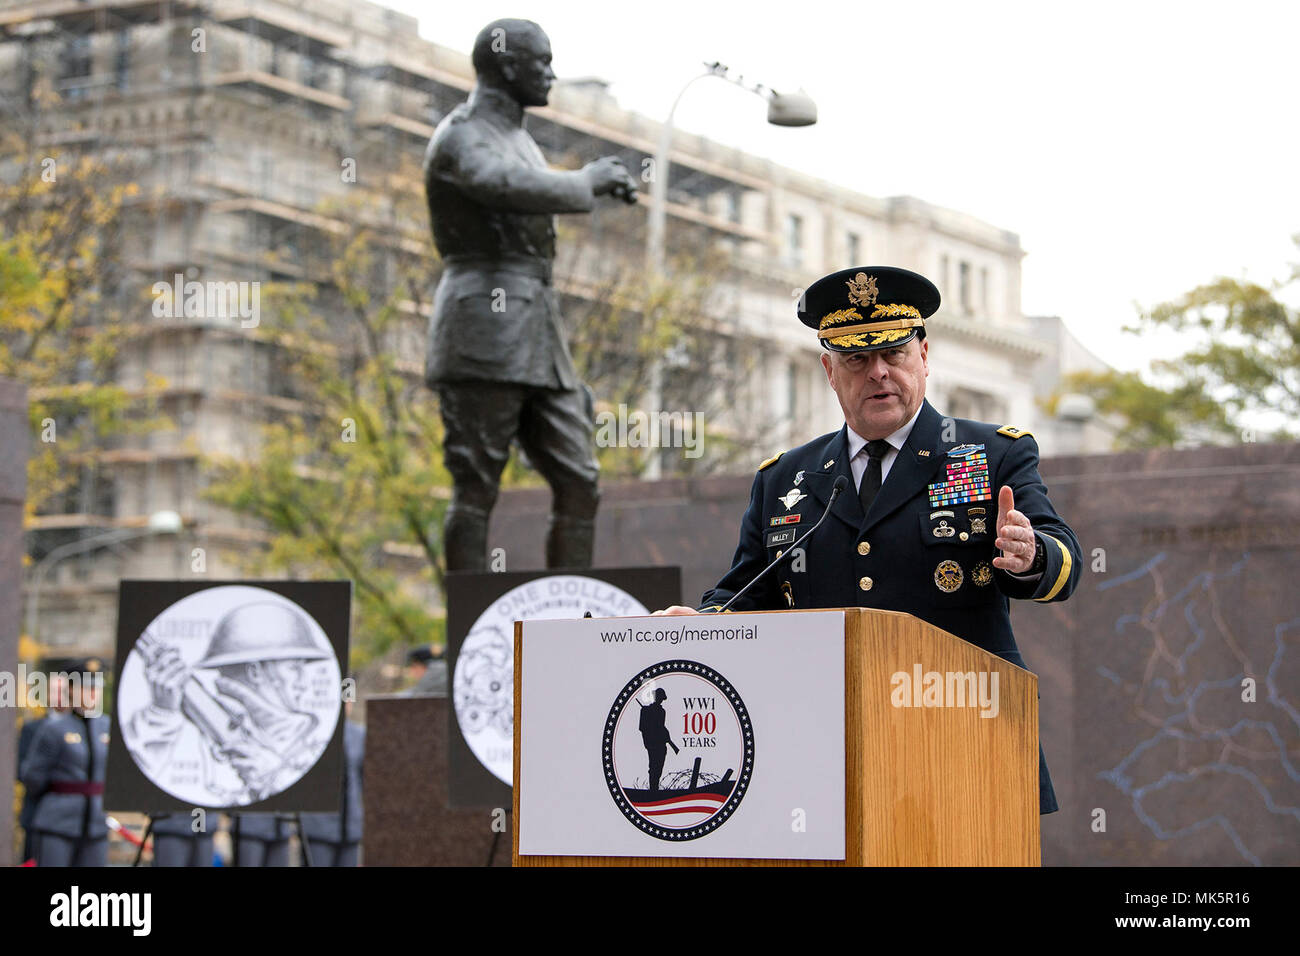 General Mark A. Milley, U.S. Army Chief of Staff, speaks at the ceremonial groundbreaking for the National World War I Memorial at Pershing Park in Washington, D.C. Nov. 9, 2017. Construction of the memorial is expected to be completed in a year. (DoD photo by EJ Hersom) Stock Photo